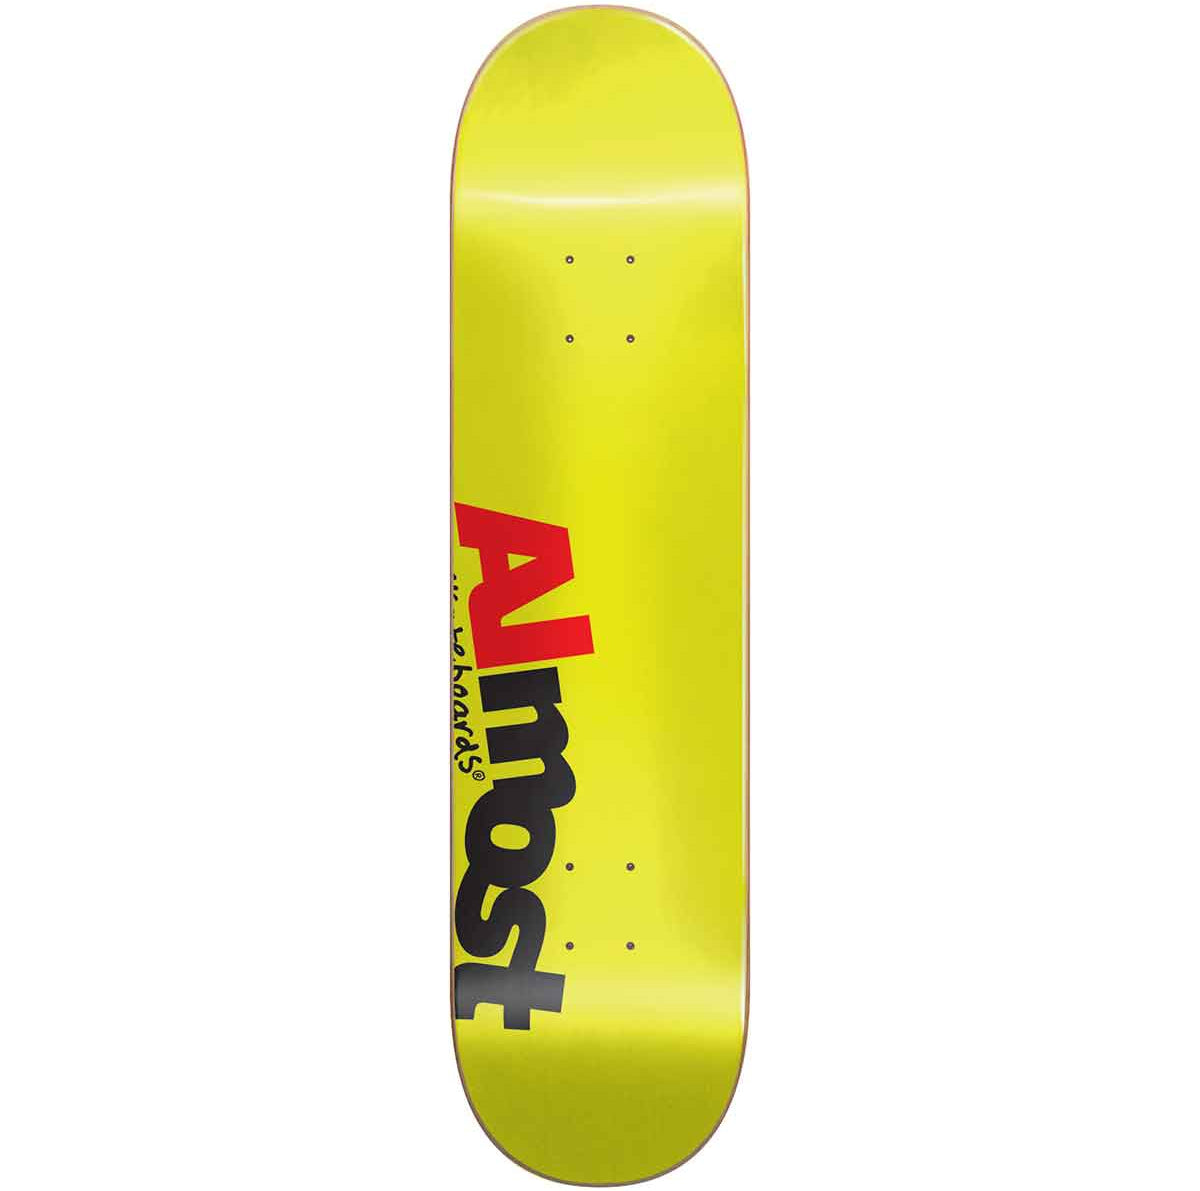 Almost - Skateboard - Deck - Most Hyb 8.5" (Yellow) Deck